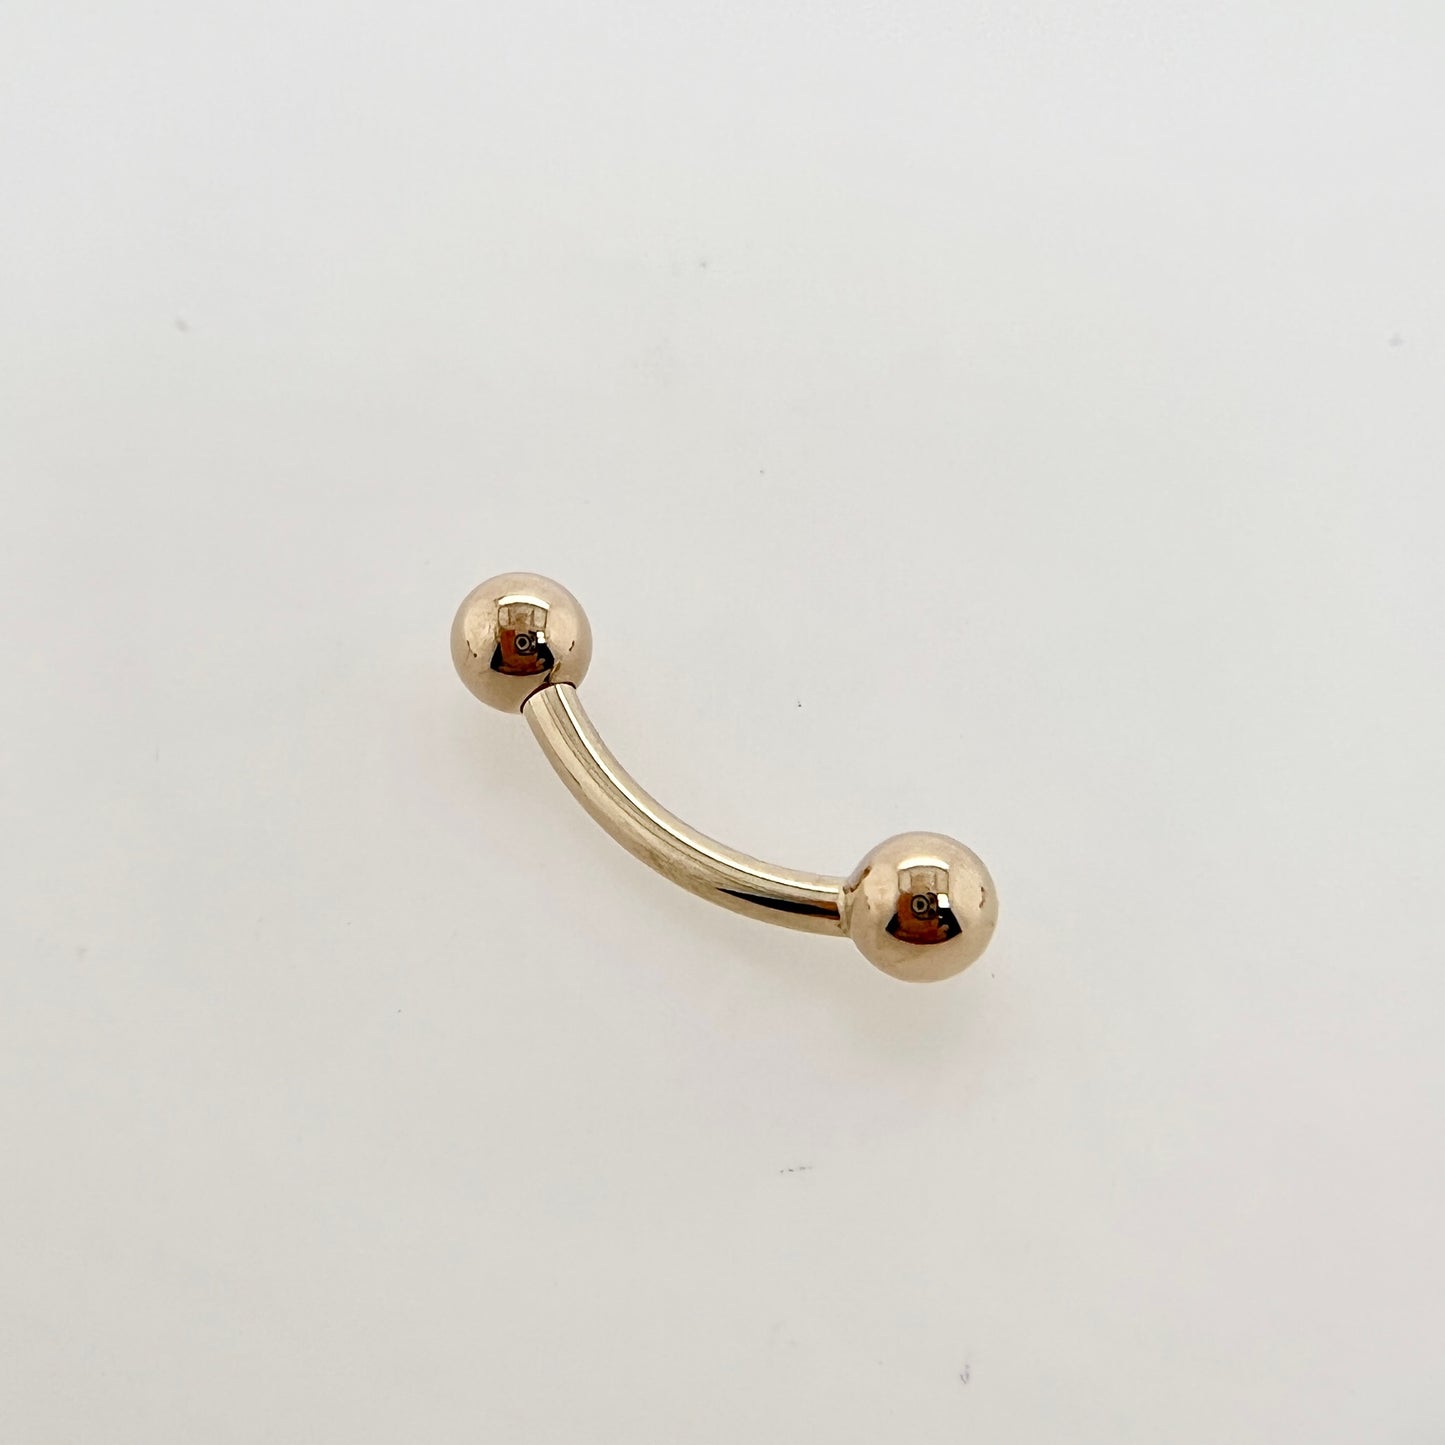 14g Curved Barbell with 1/8" Beads - Threaded